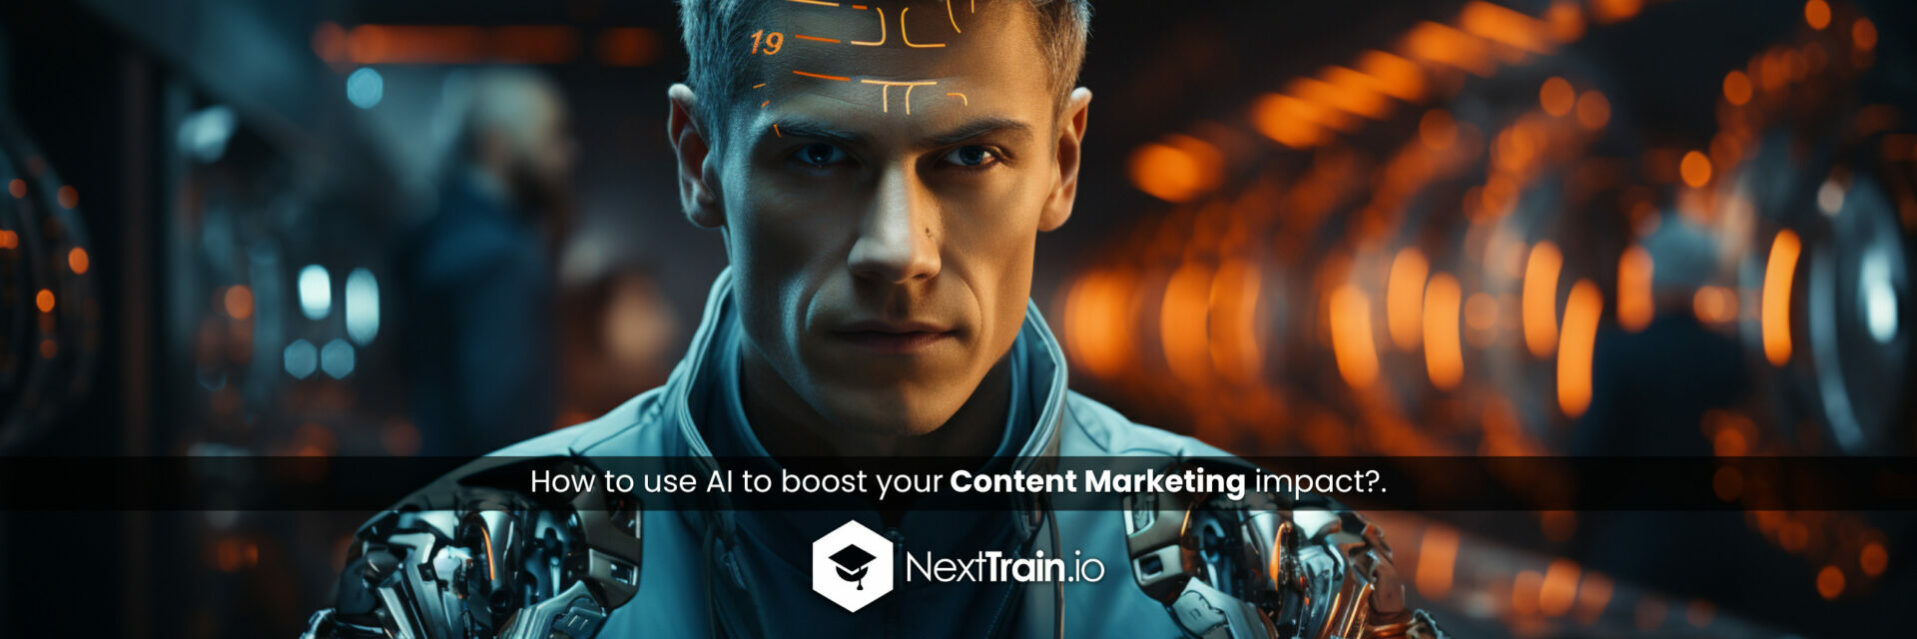 How to use AI to boost your Content Marketing impact?.